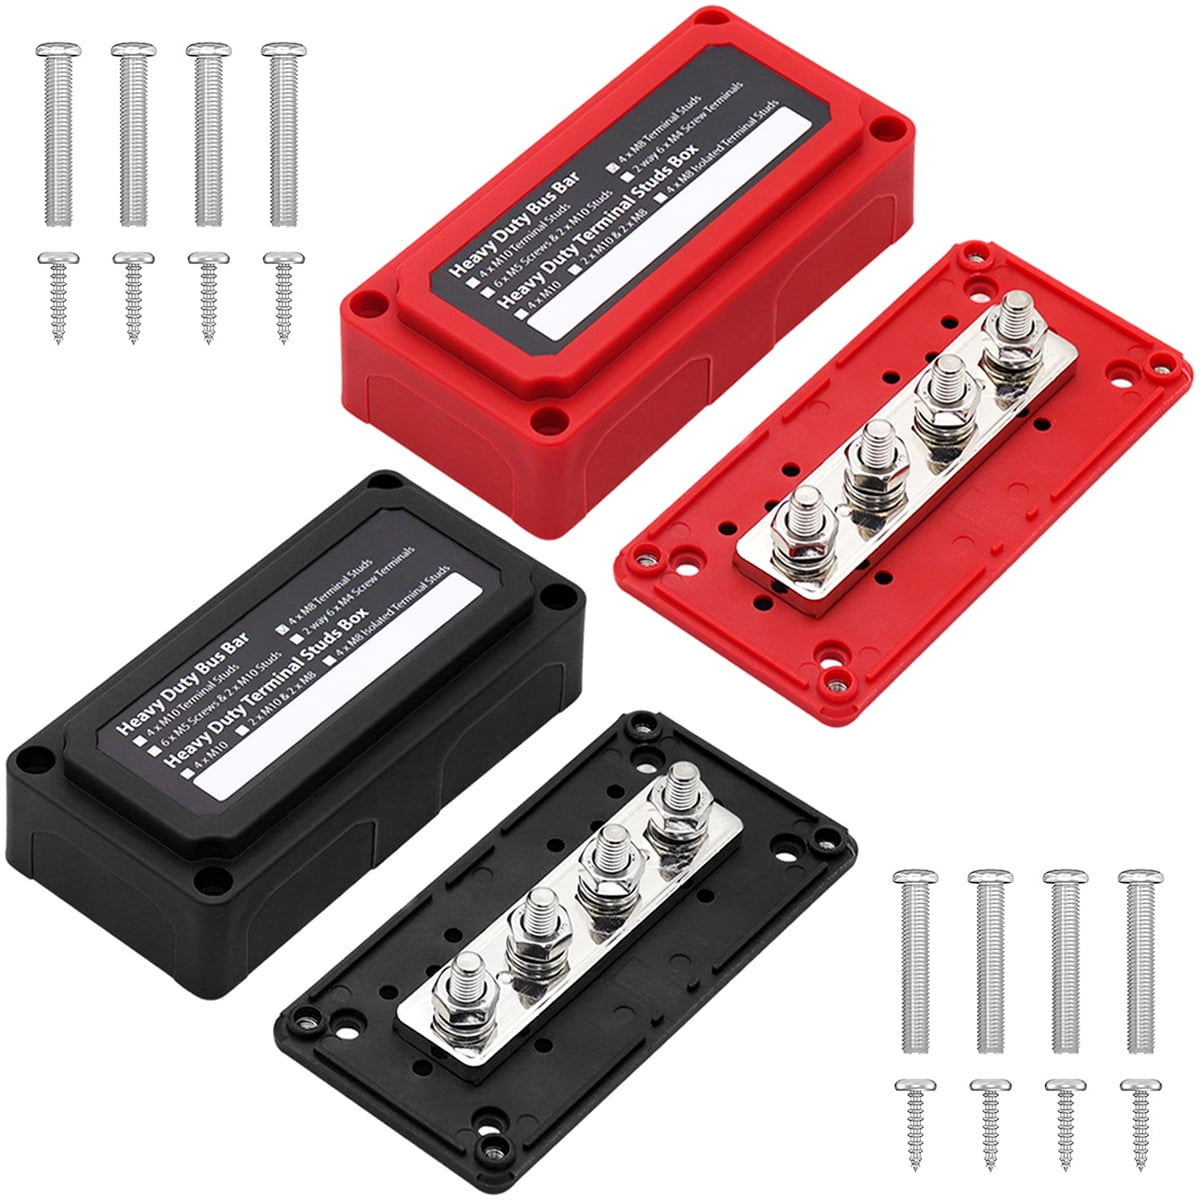 12 V - 48 V Bus Bar Power Distribution Block With 4 X M8 Terminal Studs,  High Performance Module Busbar With Cover For Cars Rvs Ships Yachts